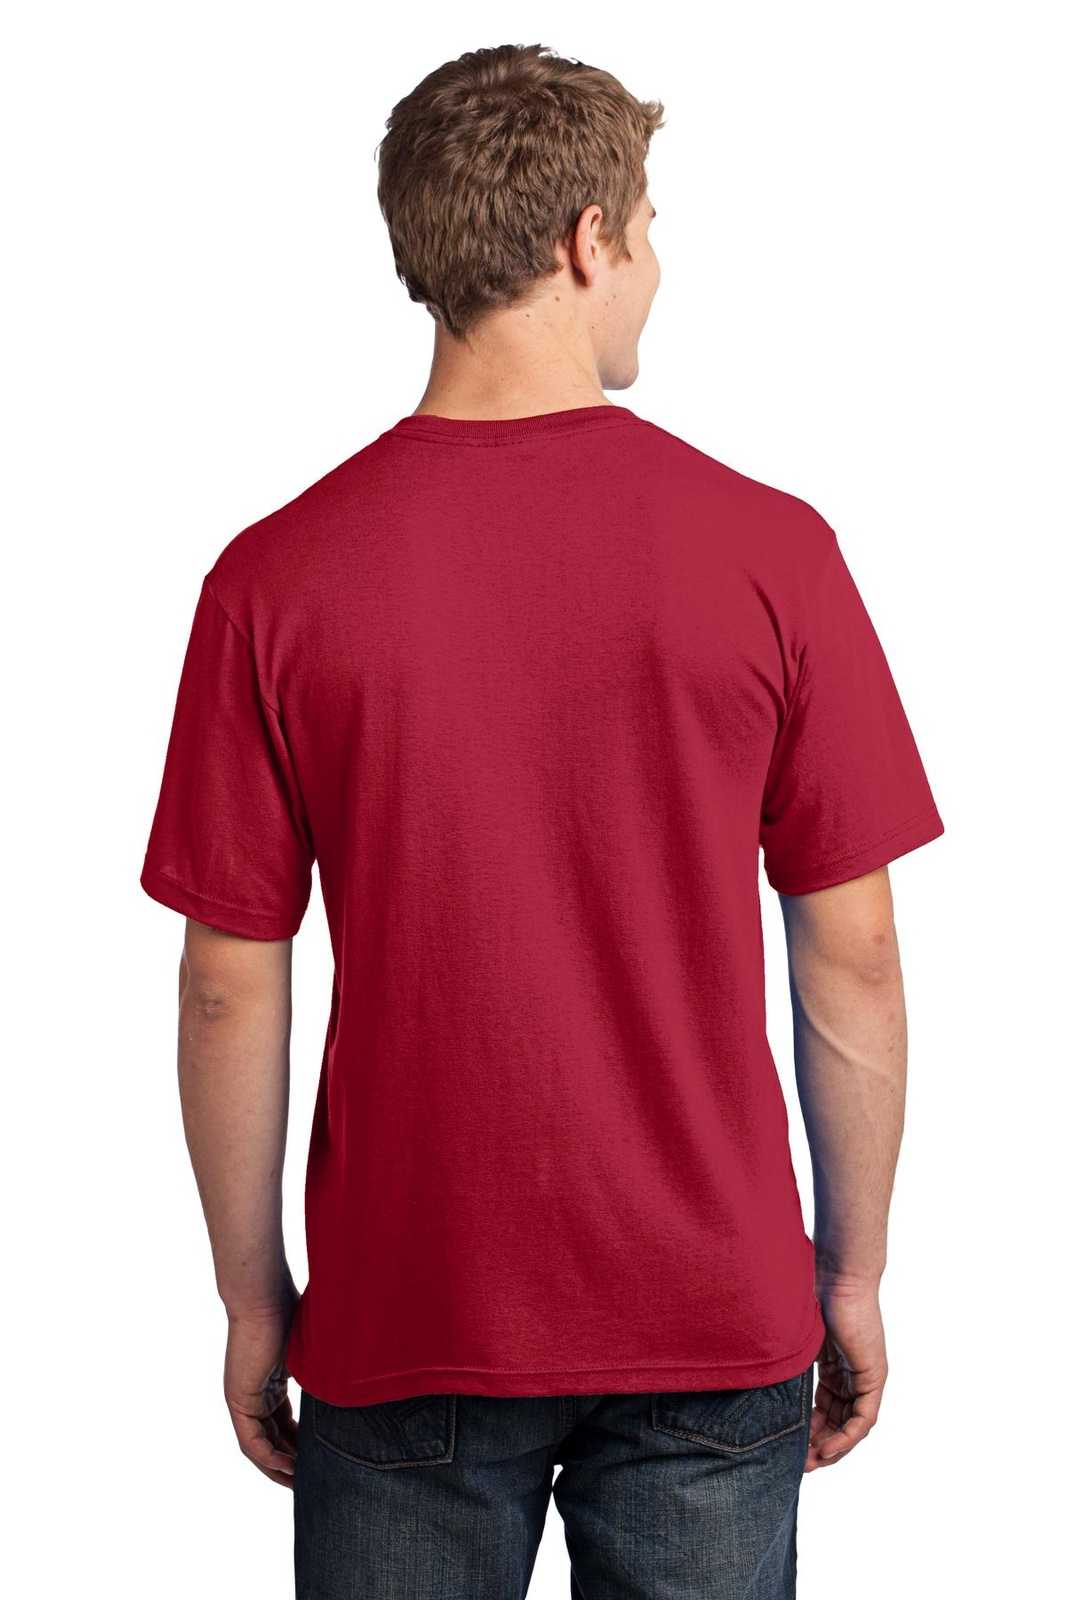 Port &amp; Company USA100P All-American Pocket Tee - Red - HIT a Double - 2